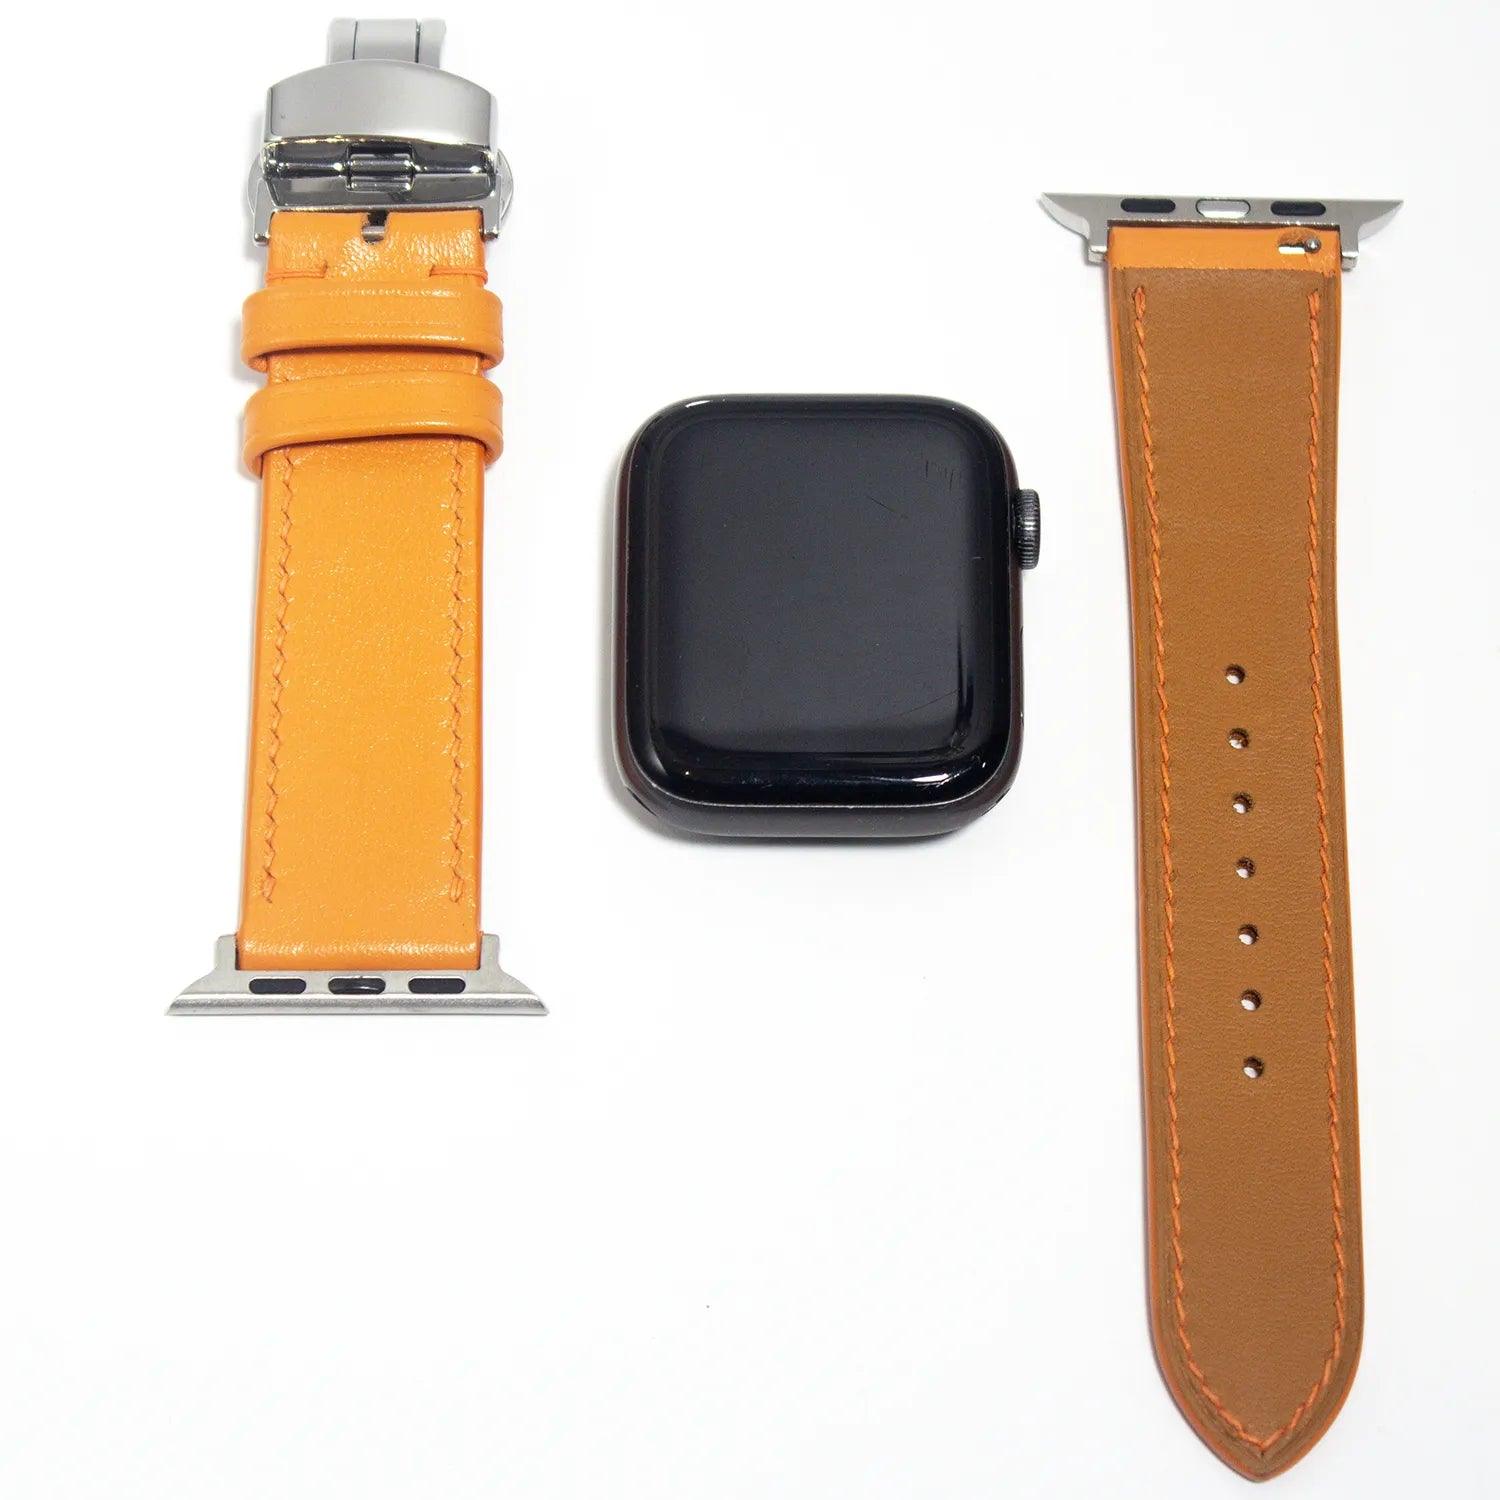 Durable leather watch straps in a striking orange Swift leather, designed for both style and long-lasting elegance.